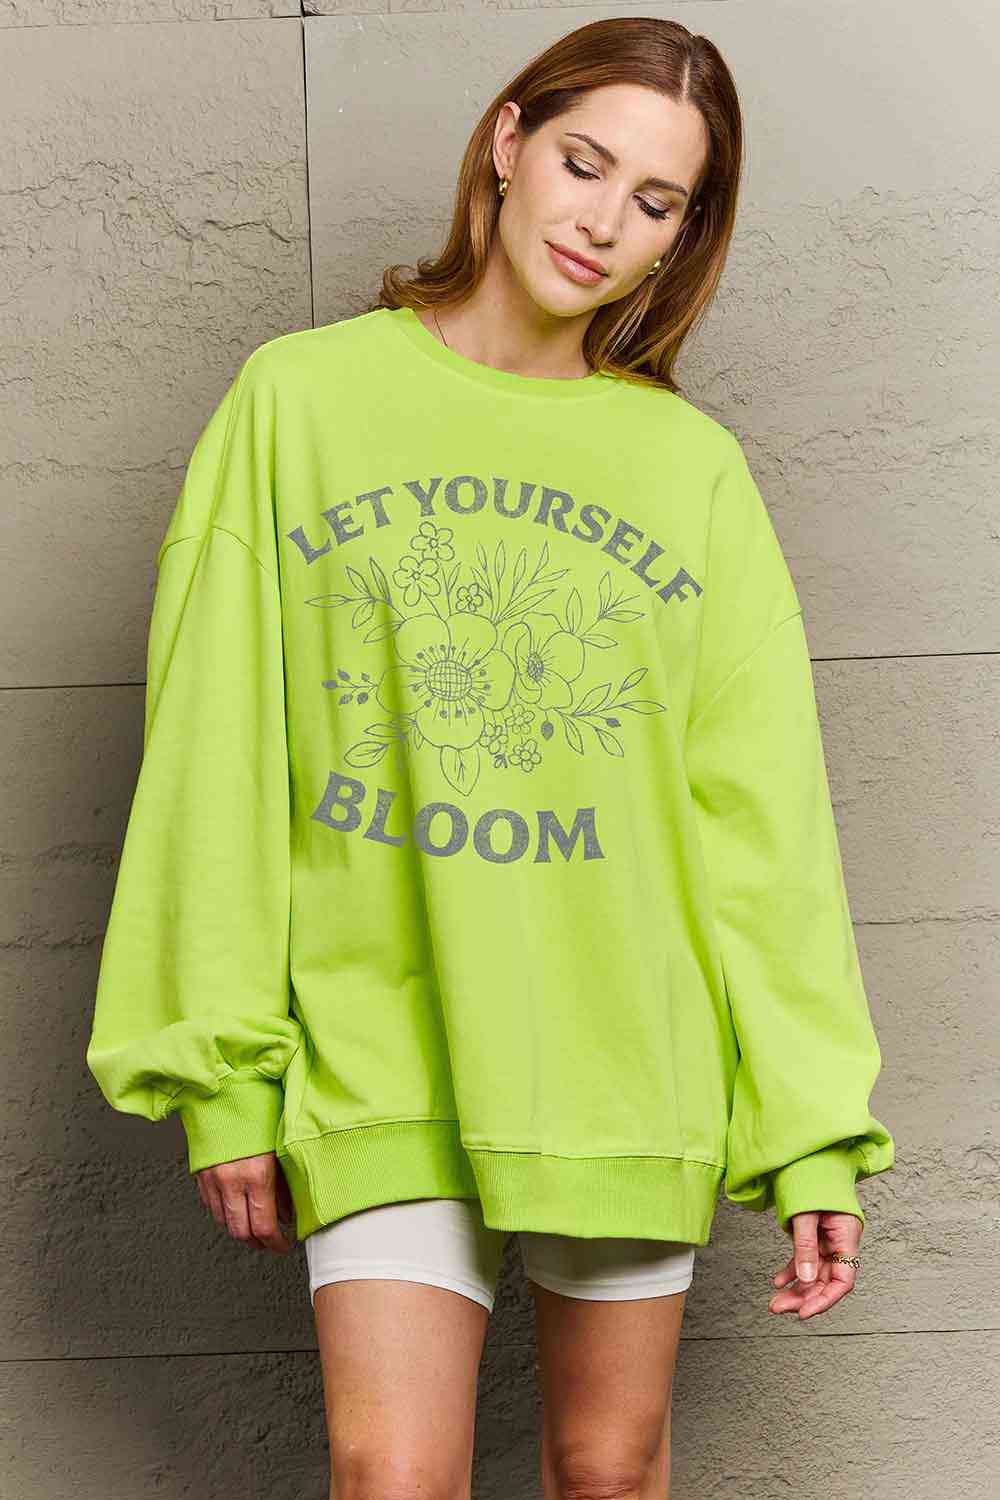 Simply Love Simply Love Full Size LET YOURSELF BLOOM Graphic Sweatshirt - Rose Gold Co. Shop